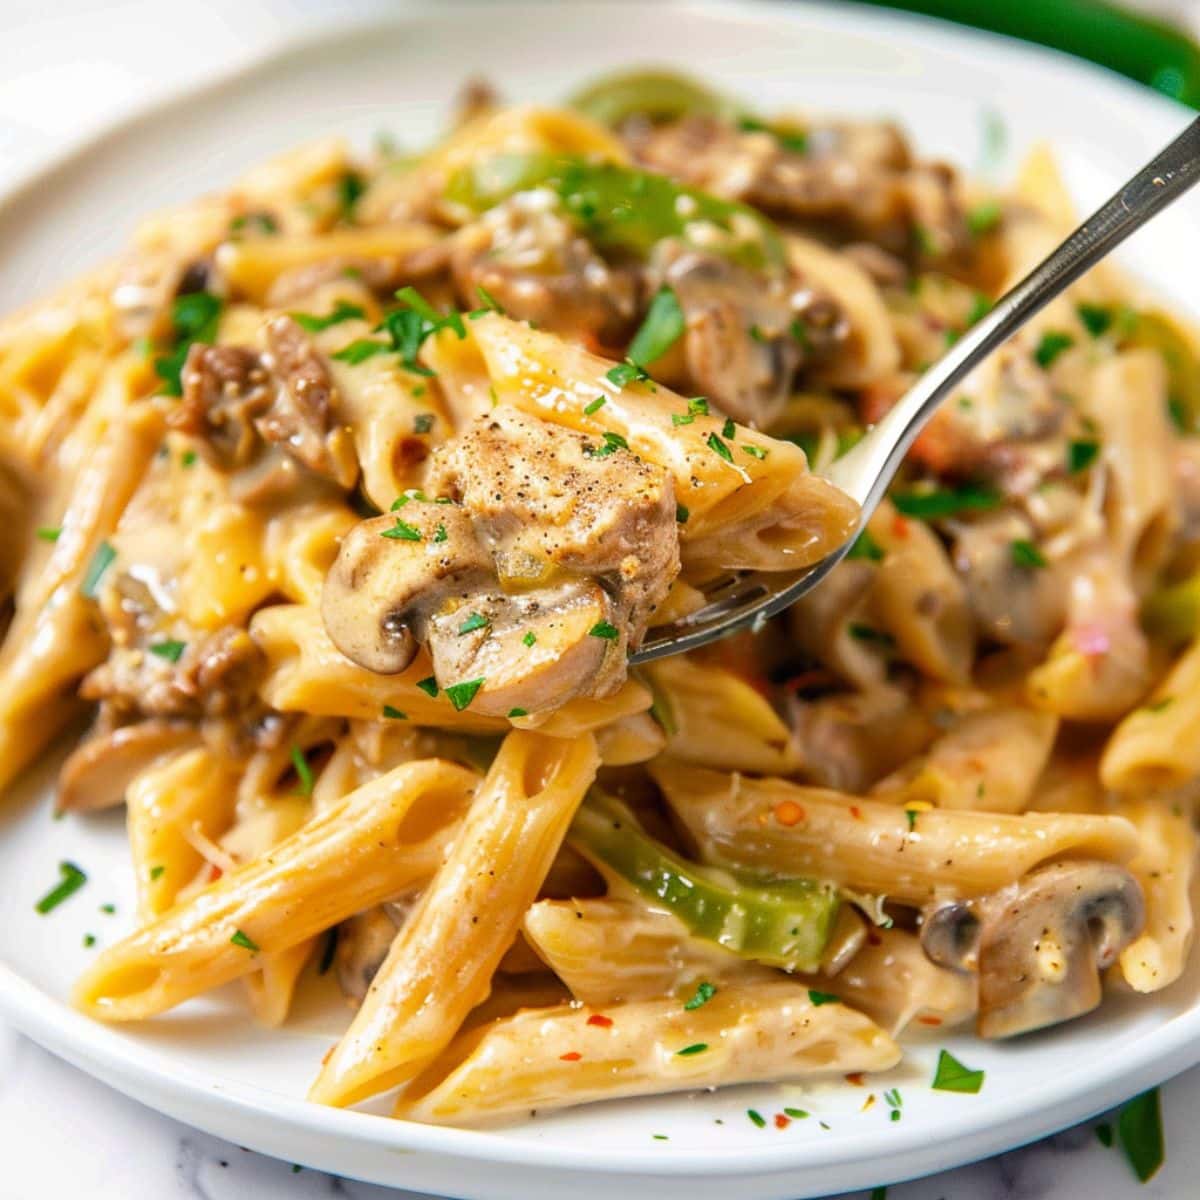 Fork lifting a portion of Philly cheesesteak pasta.